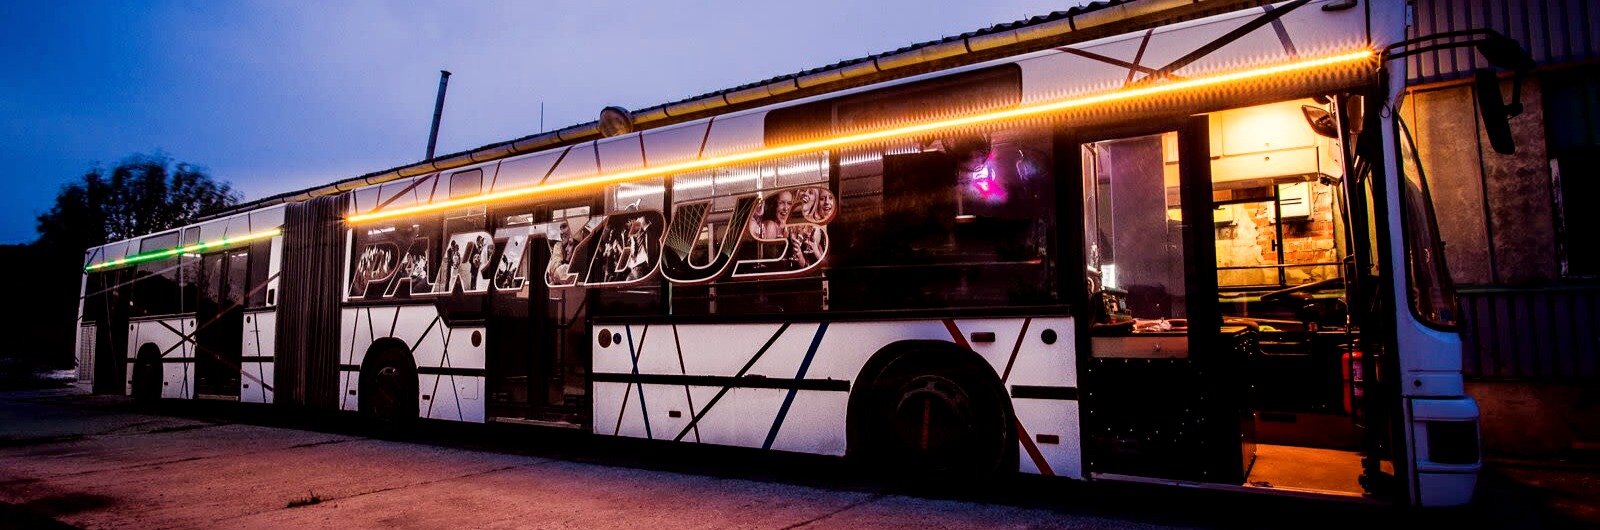 Partybus Hungary